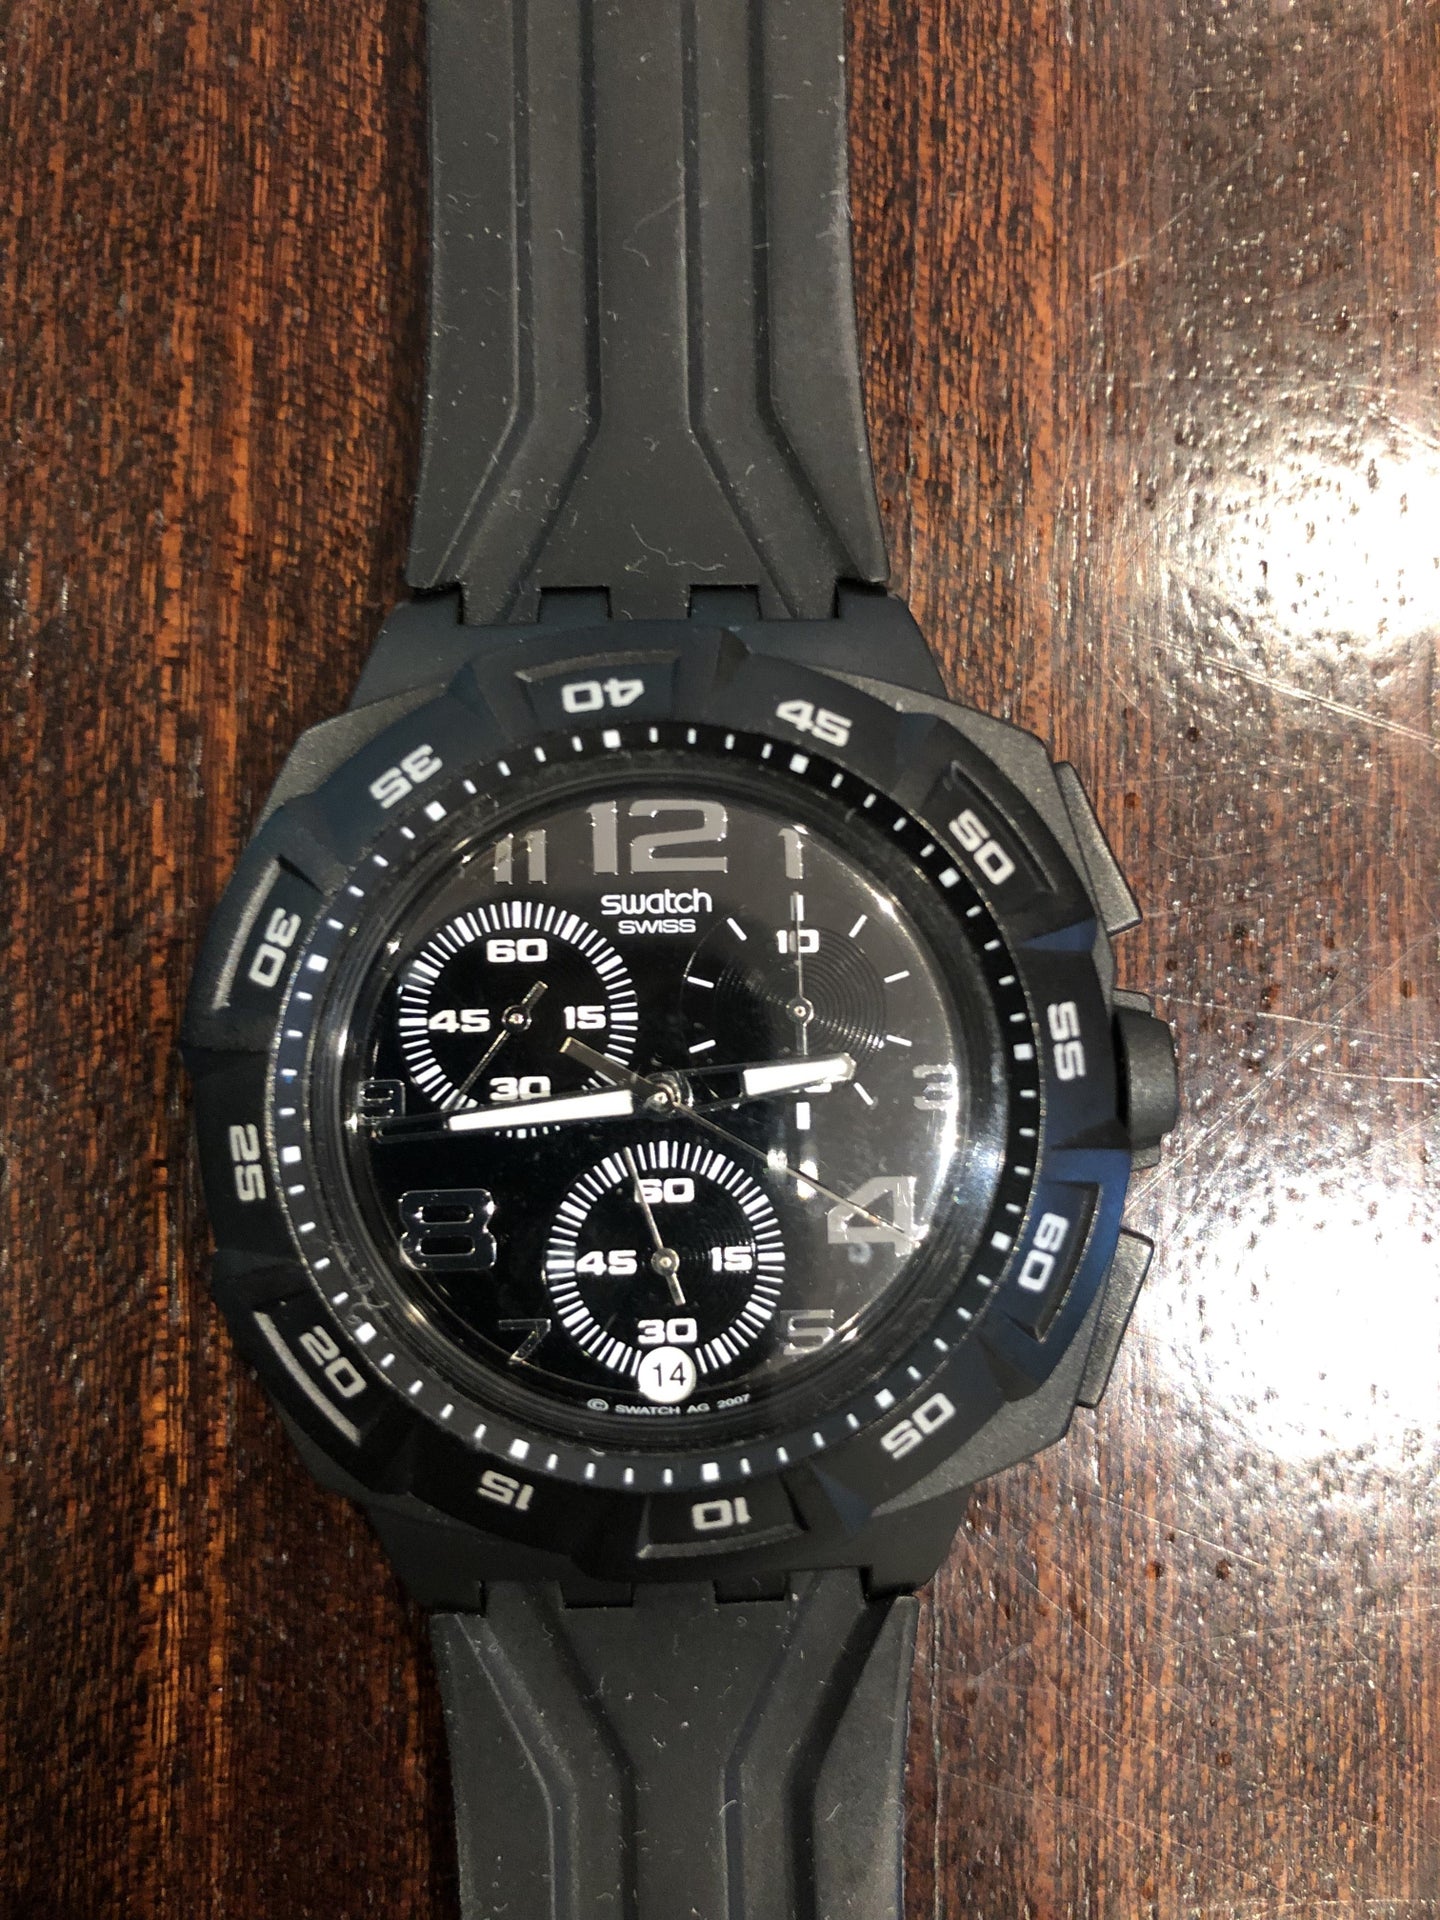 SOLD: Swatch all black chronograph